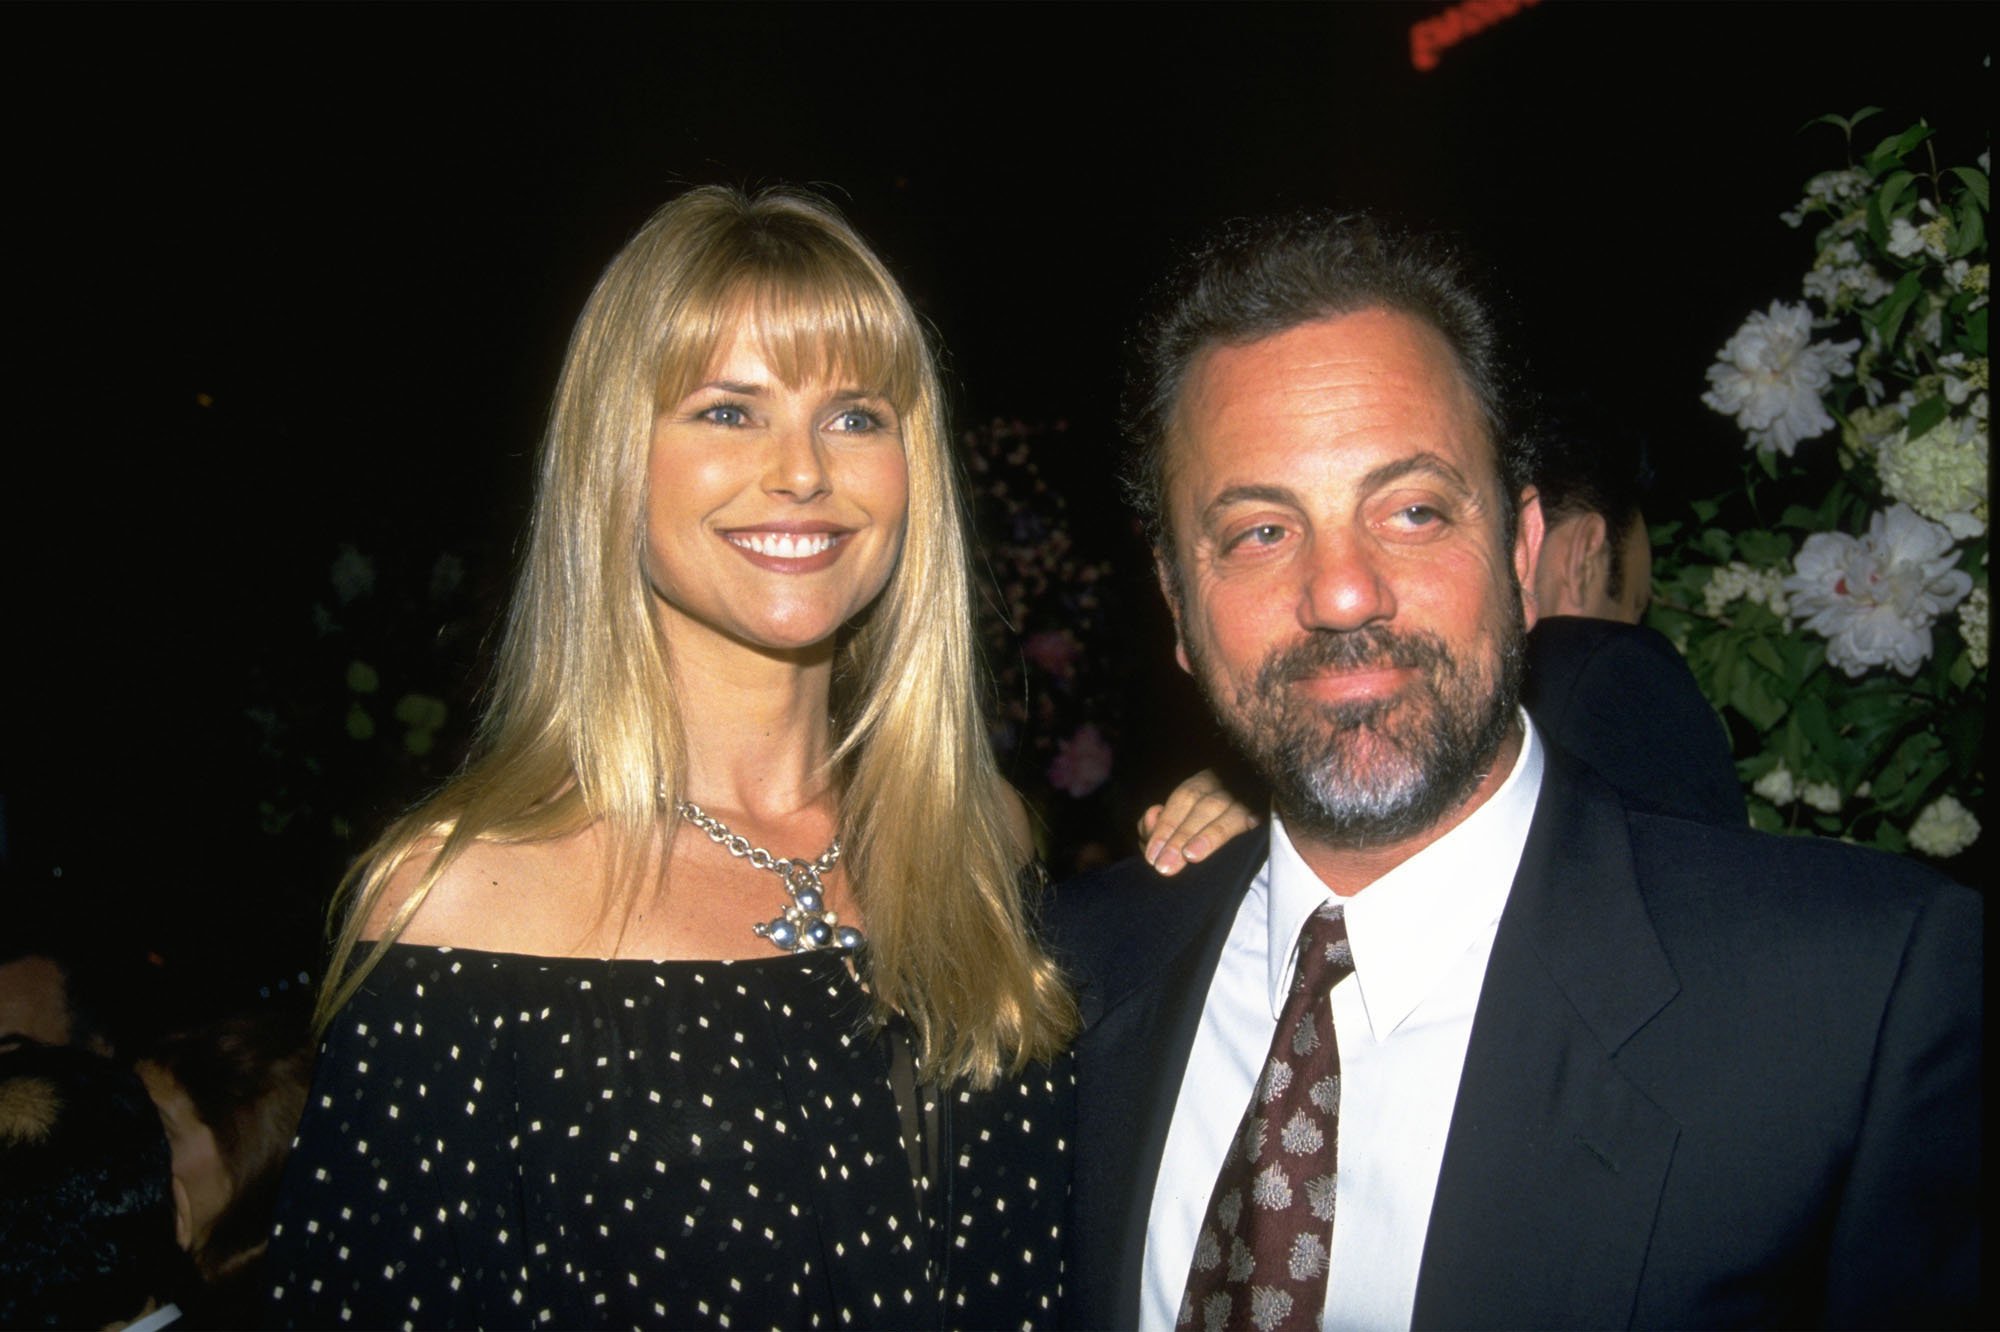 Christie Brinkley and Billy Joel circa 1993 in New York City | Photo: Getty Images